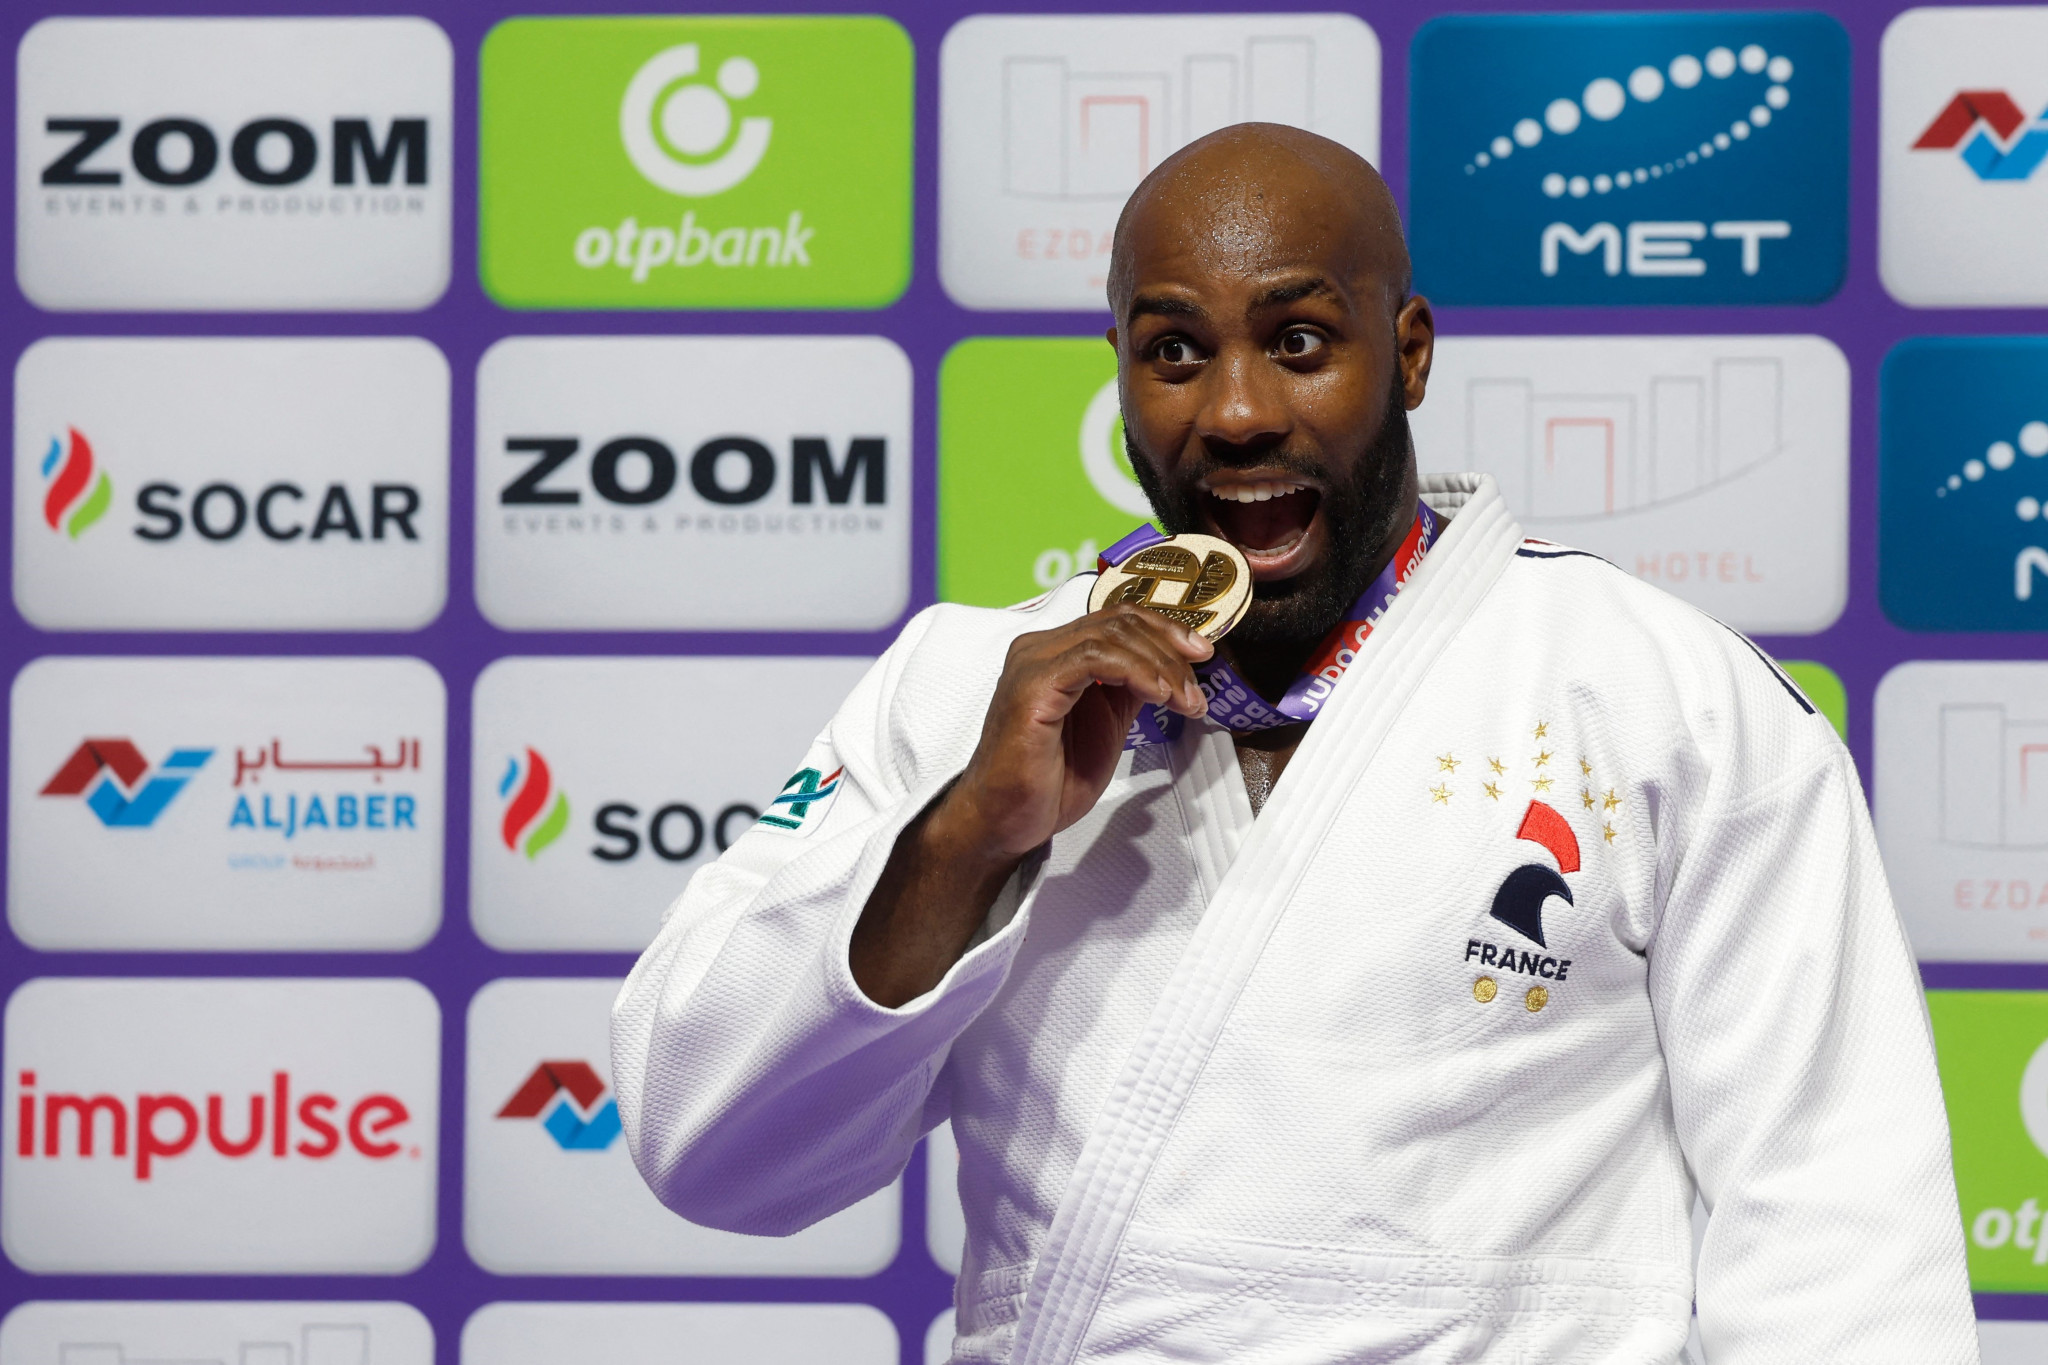 Riner revels in more glory at World Judo Championships as Sone brings down giant